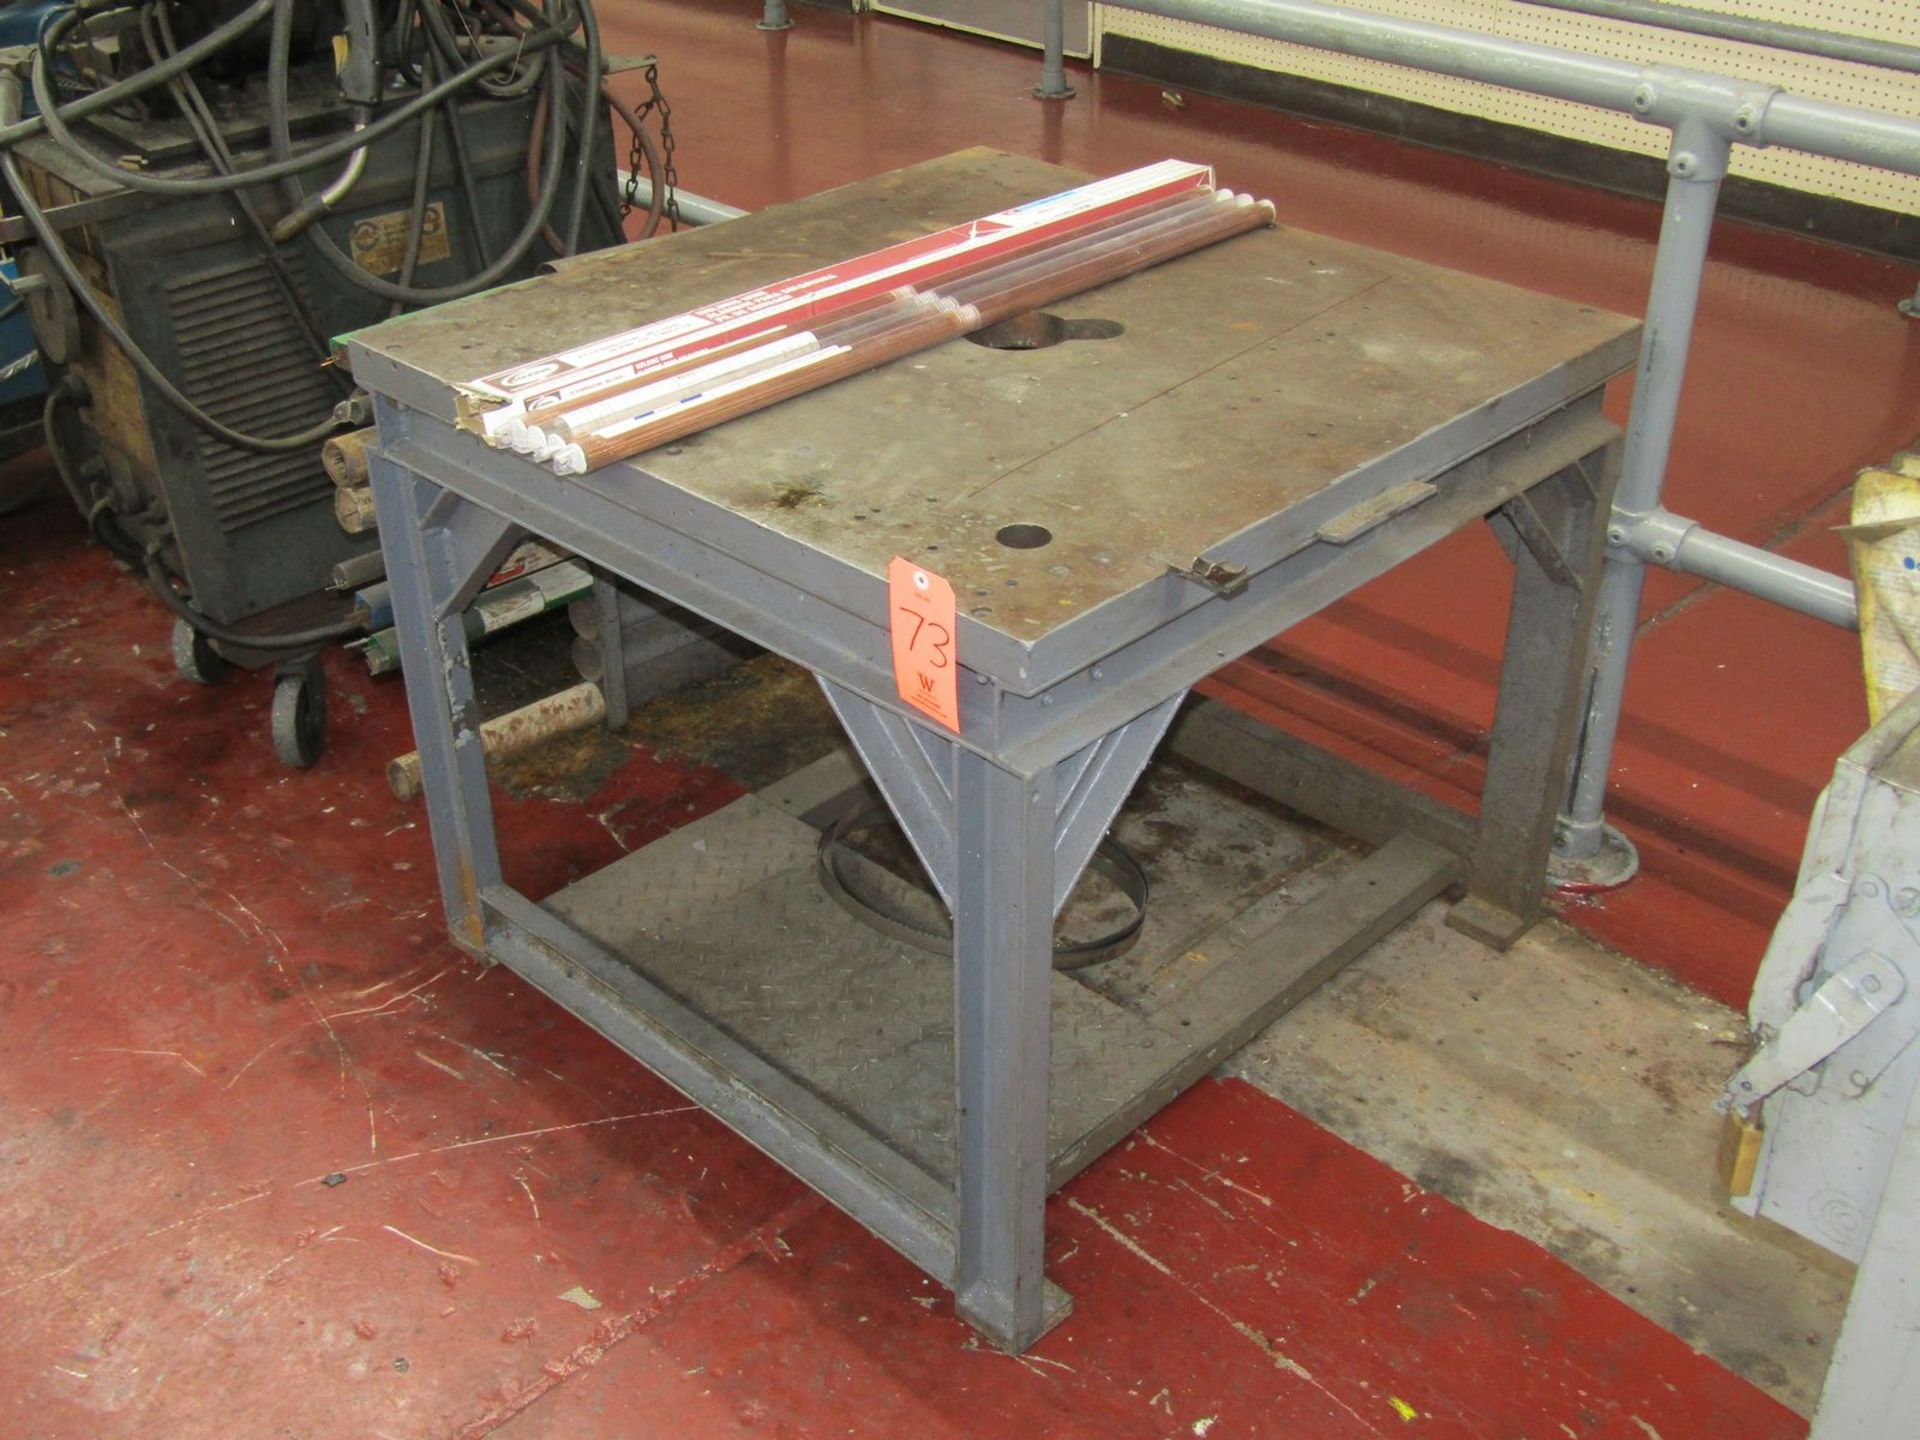 Steel Welding Table, 35 in. L x 35 in. W x 1.25 in. Thick x 29 in. H, with Assorted Welding